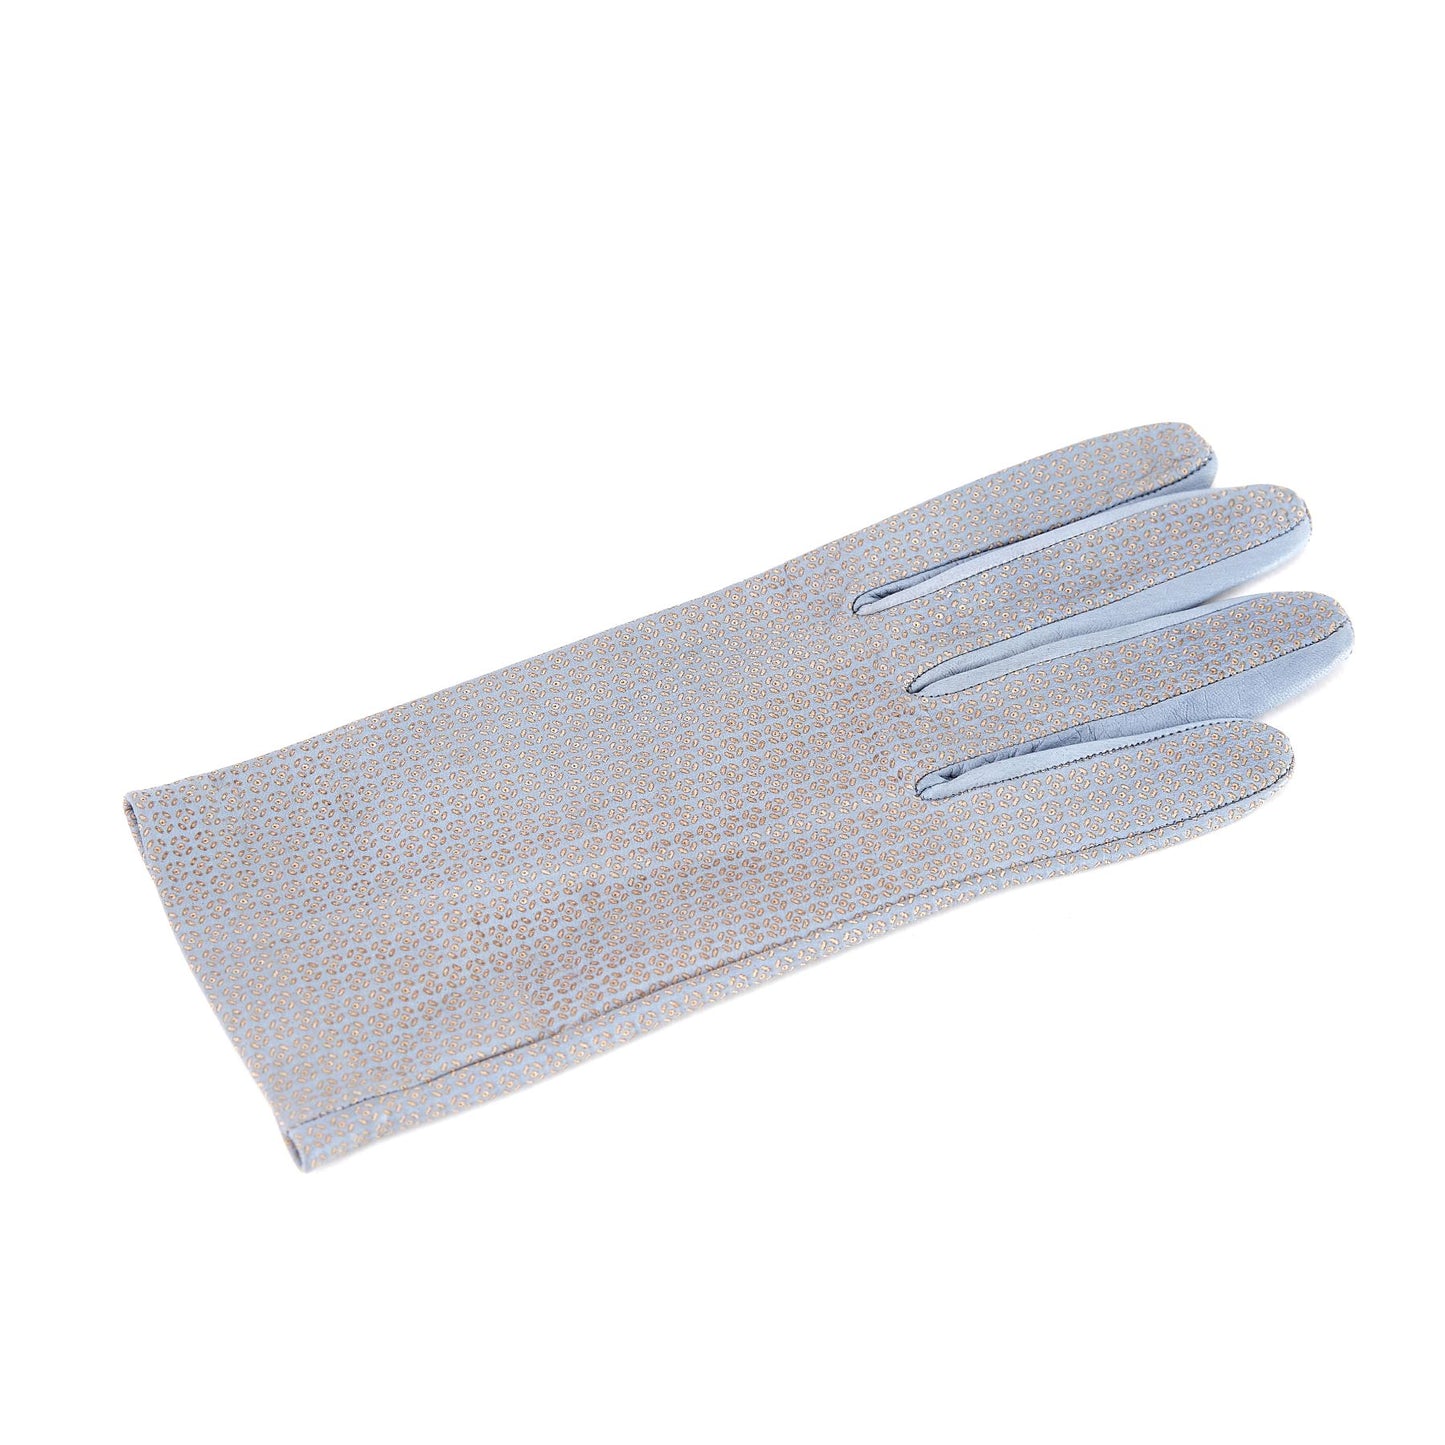 Women's unlined grey nappa leather gloves with all over laser cut detail